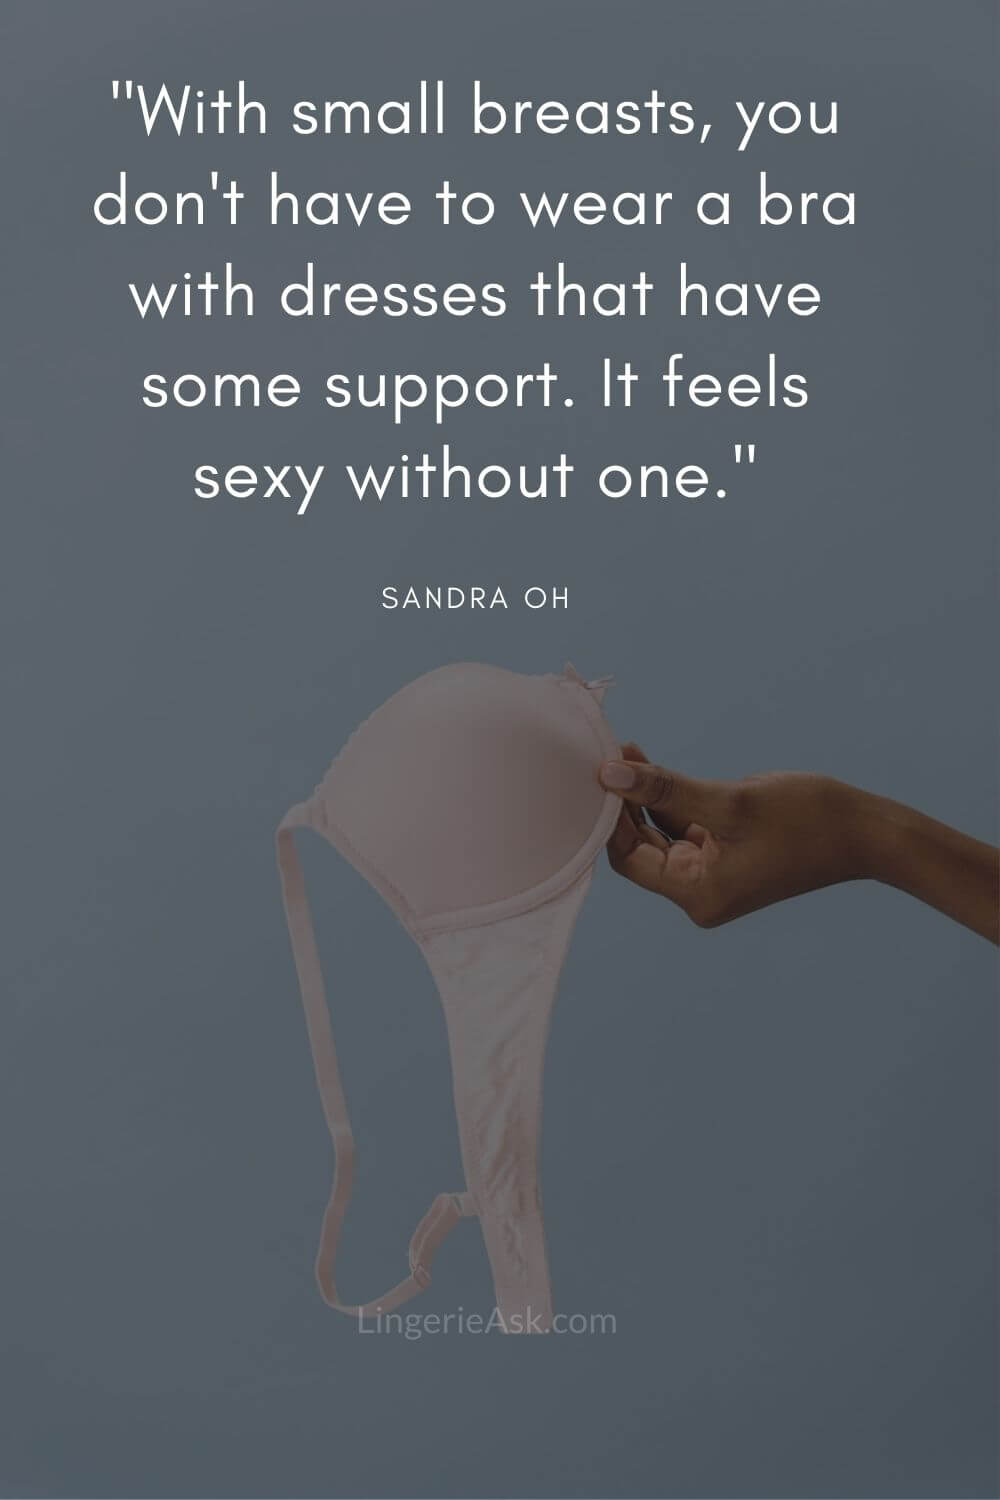 With small breasts, you don't have to wear a bra with dresses that have some support. It feels sexy without one.